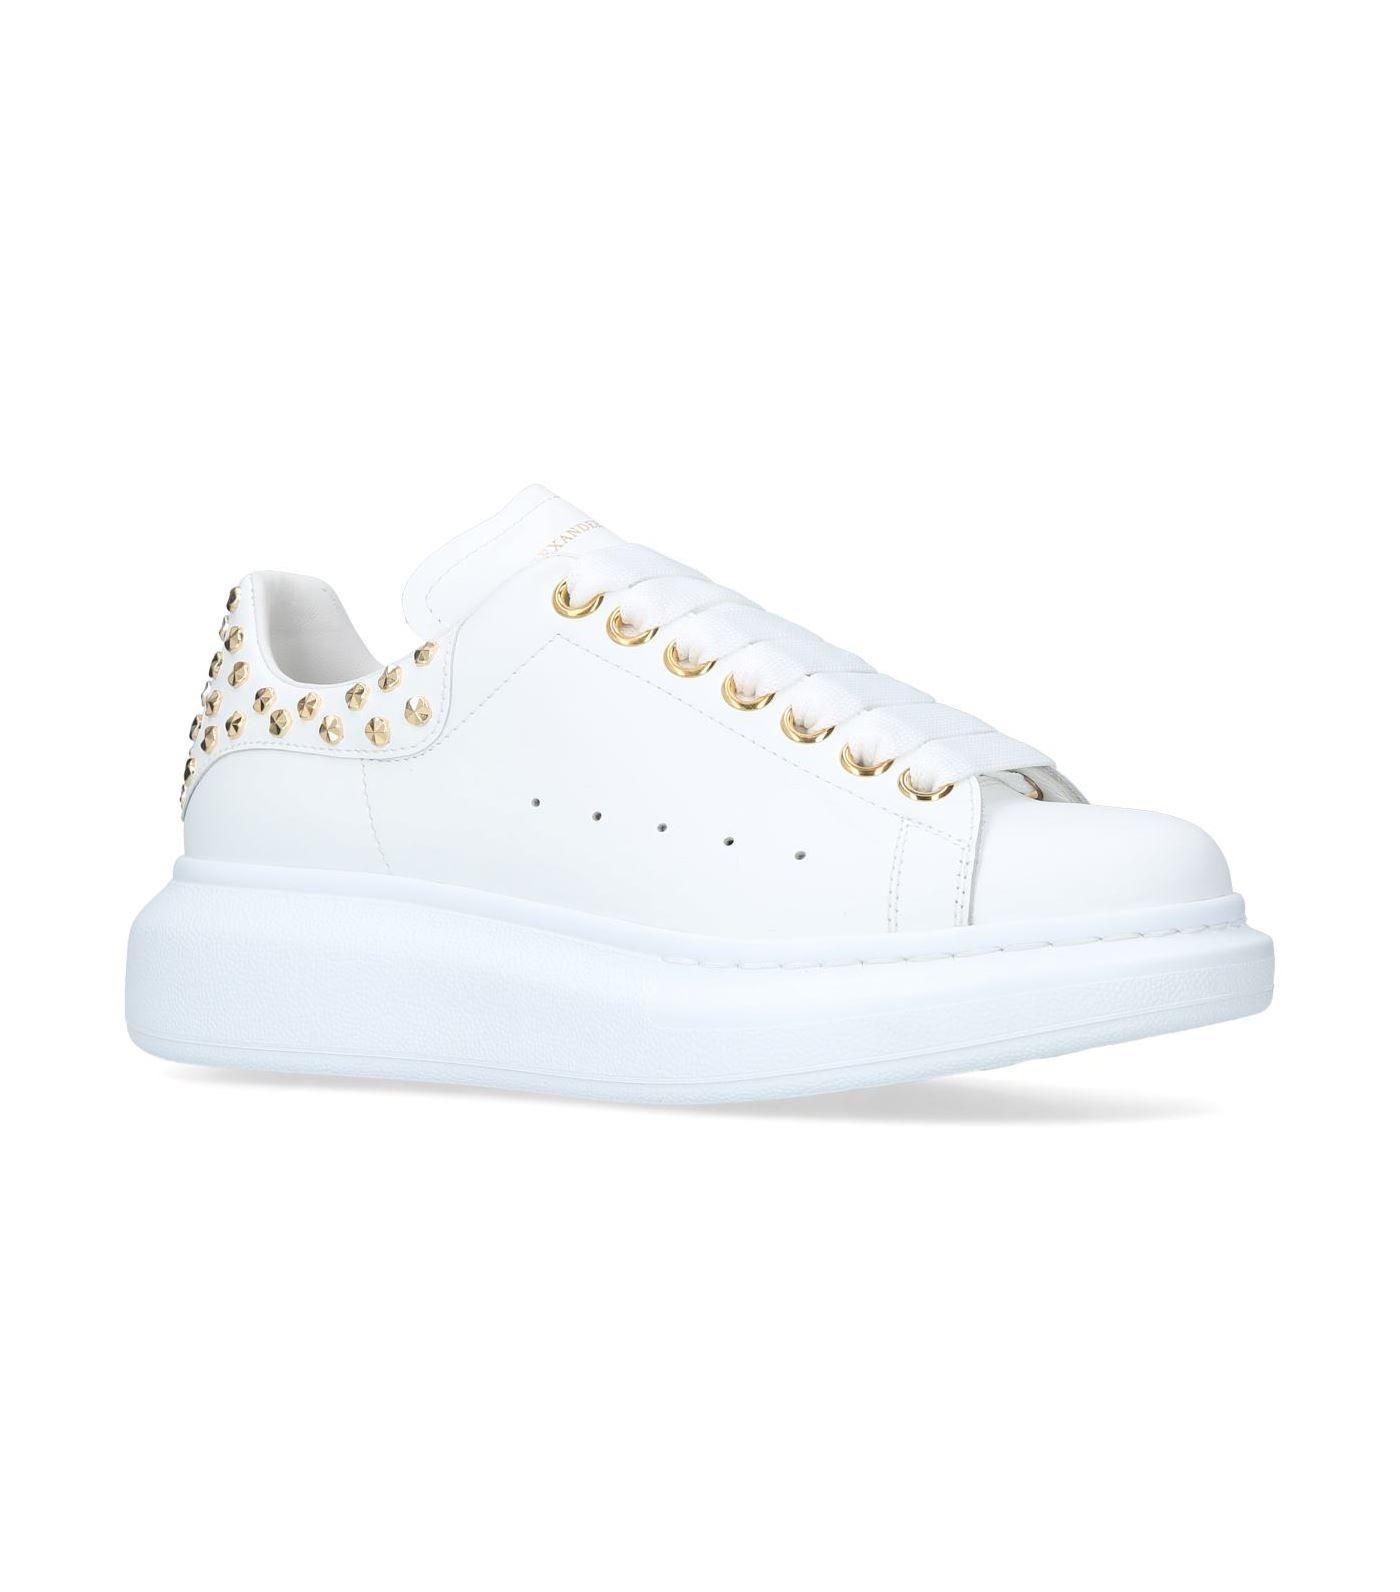 Giay Alexander McQueen Studded Oversized Sneaker mau trang tan dinh vang ma kim anh 1